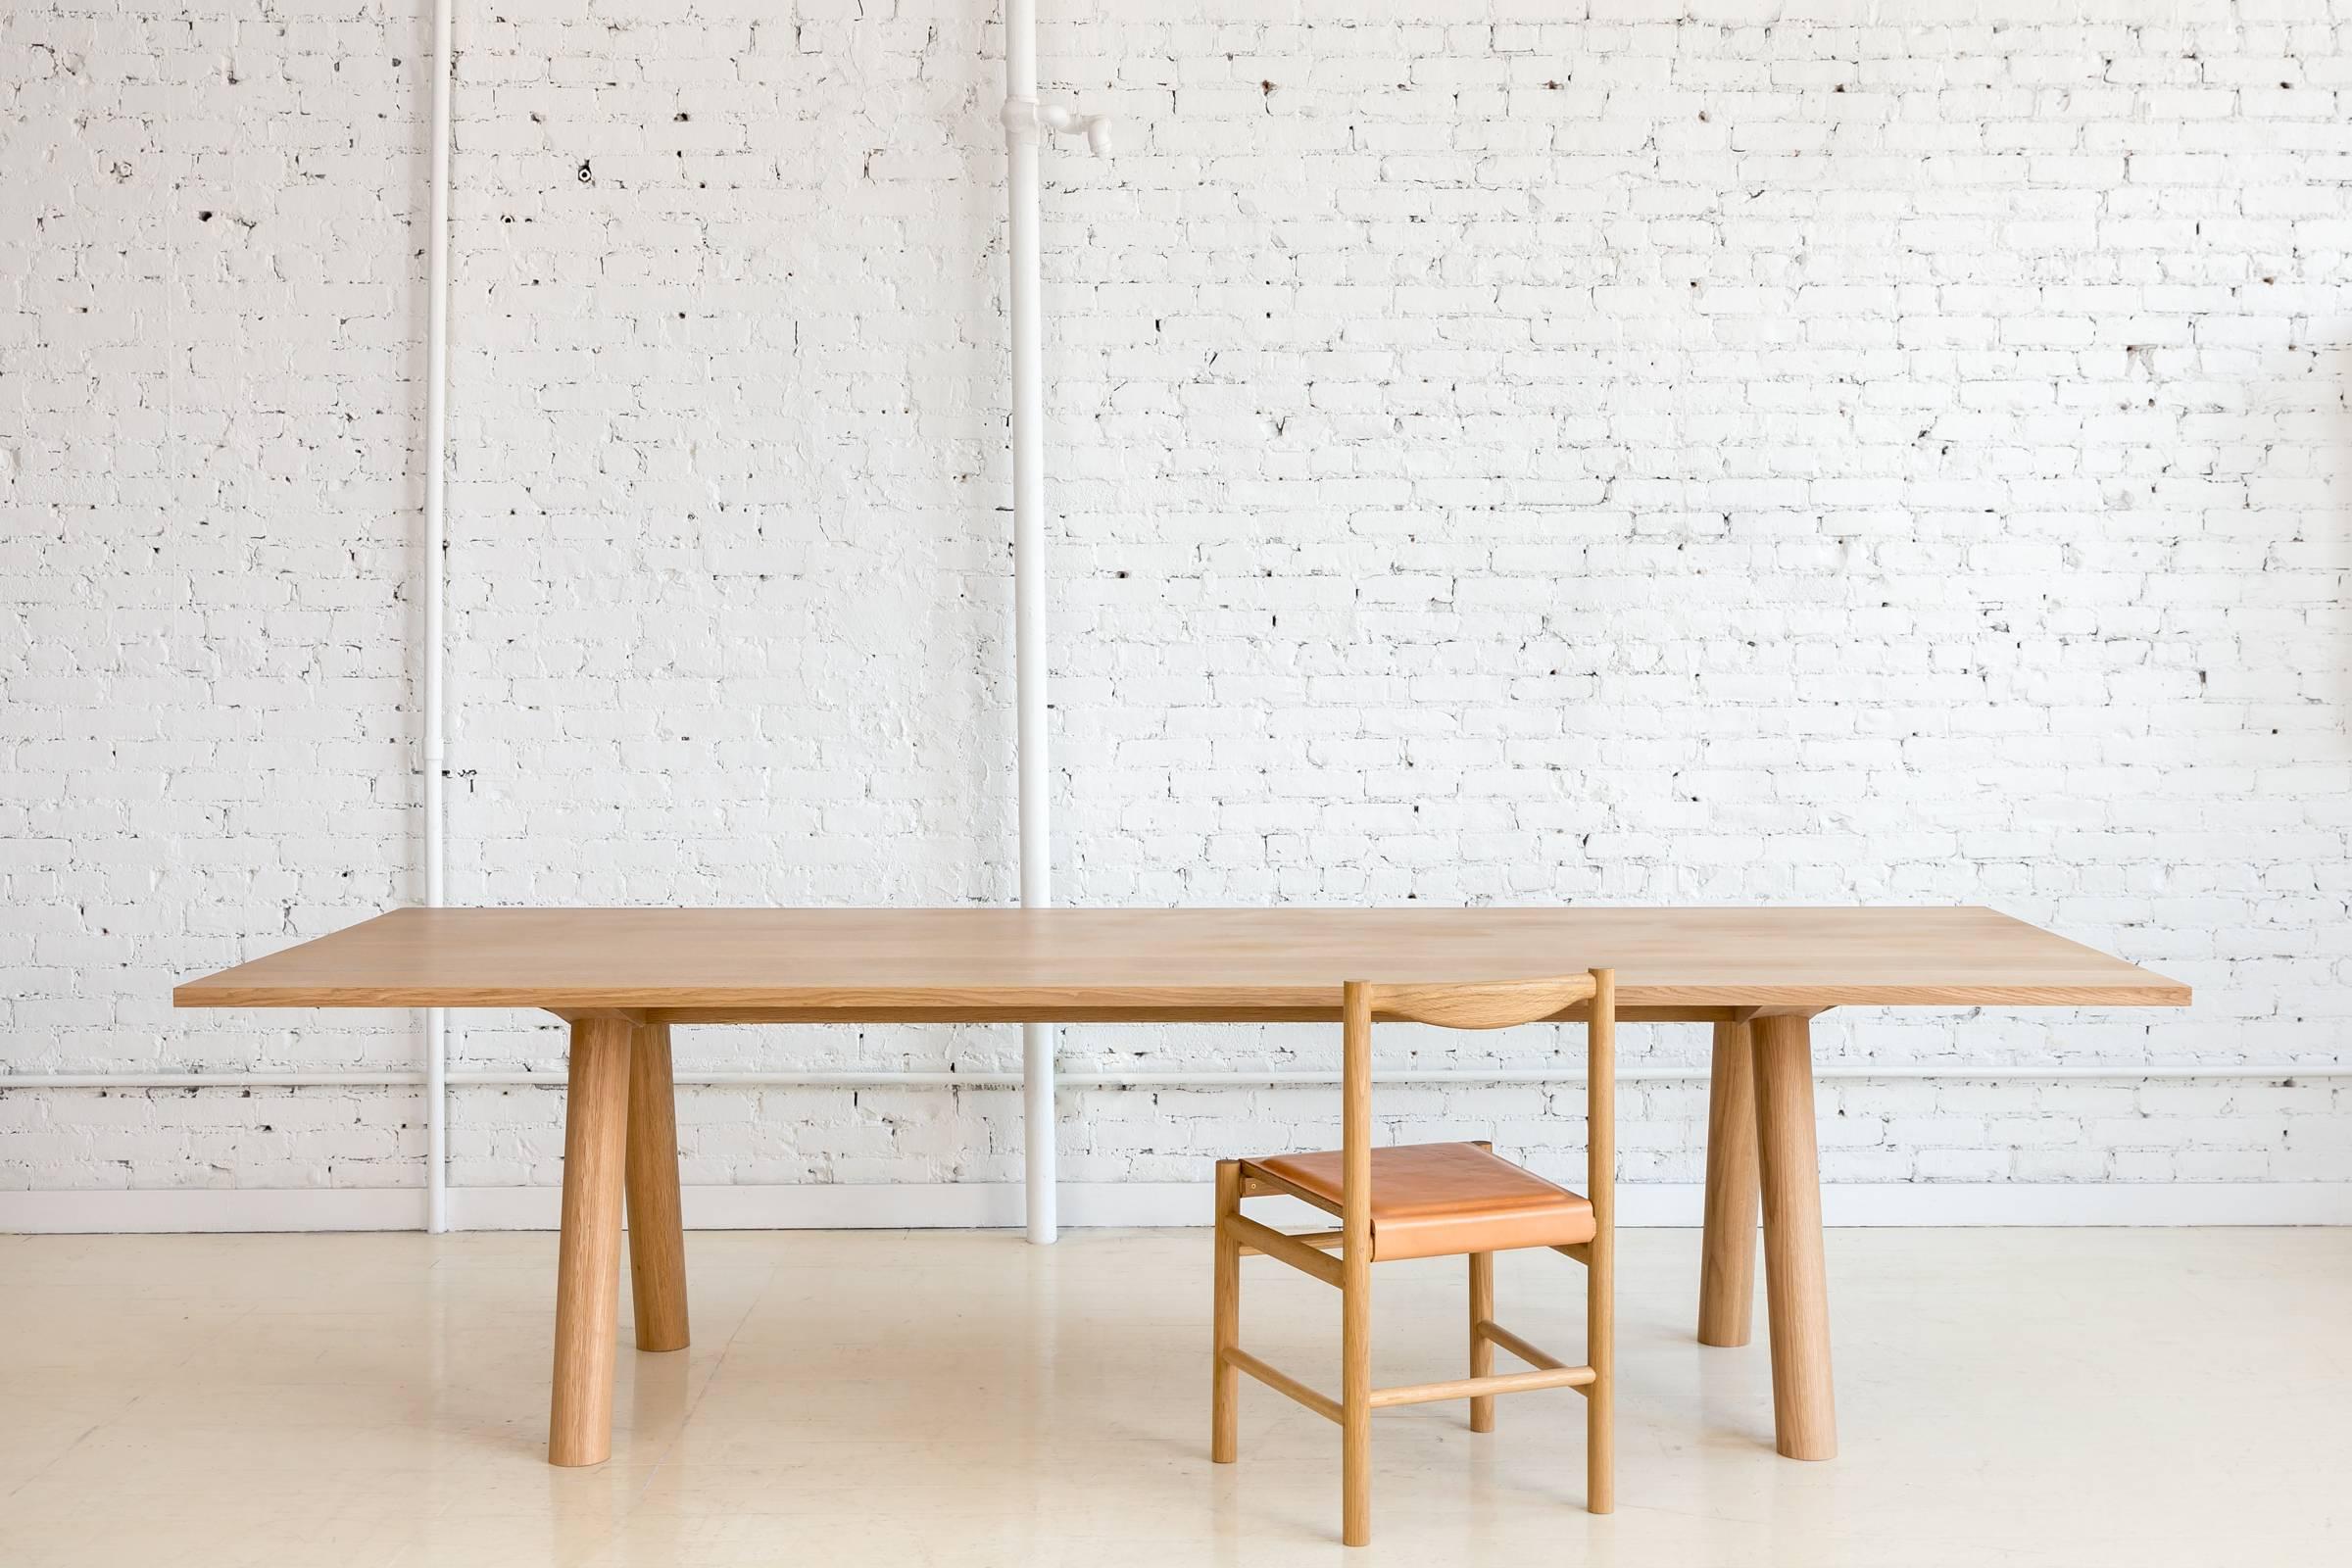 This contemporary, minimal dining table features large diameter wood legs and a bold trestle to give rise to an elegant hardwood top. Top includes rounded corners with an optional underside bevel to compliment details found on the base.

Made to